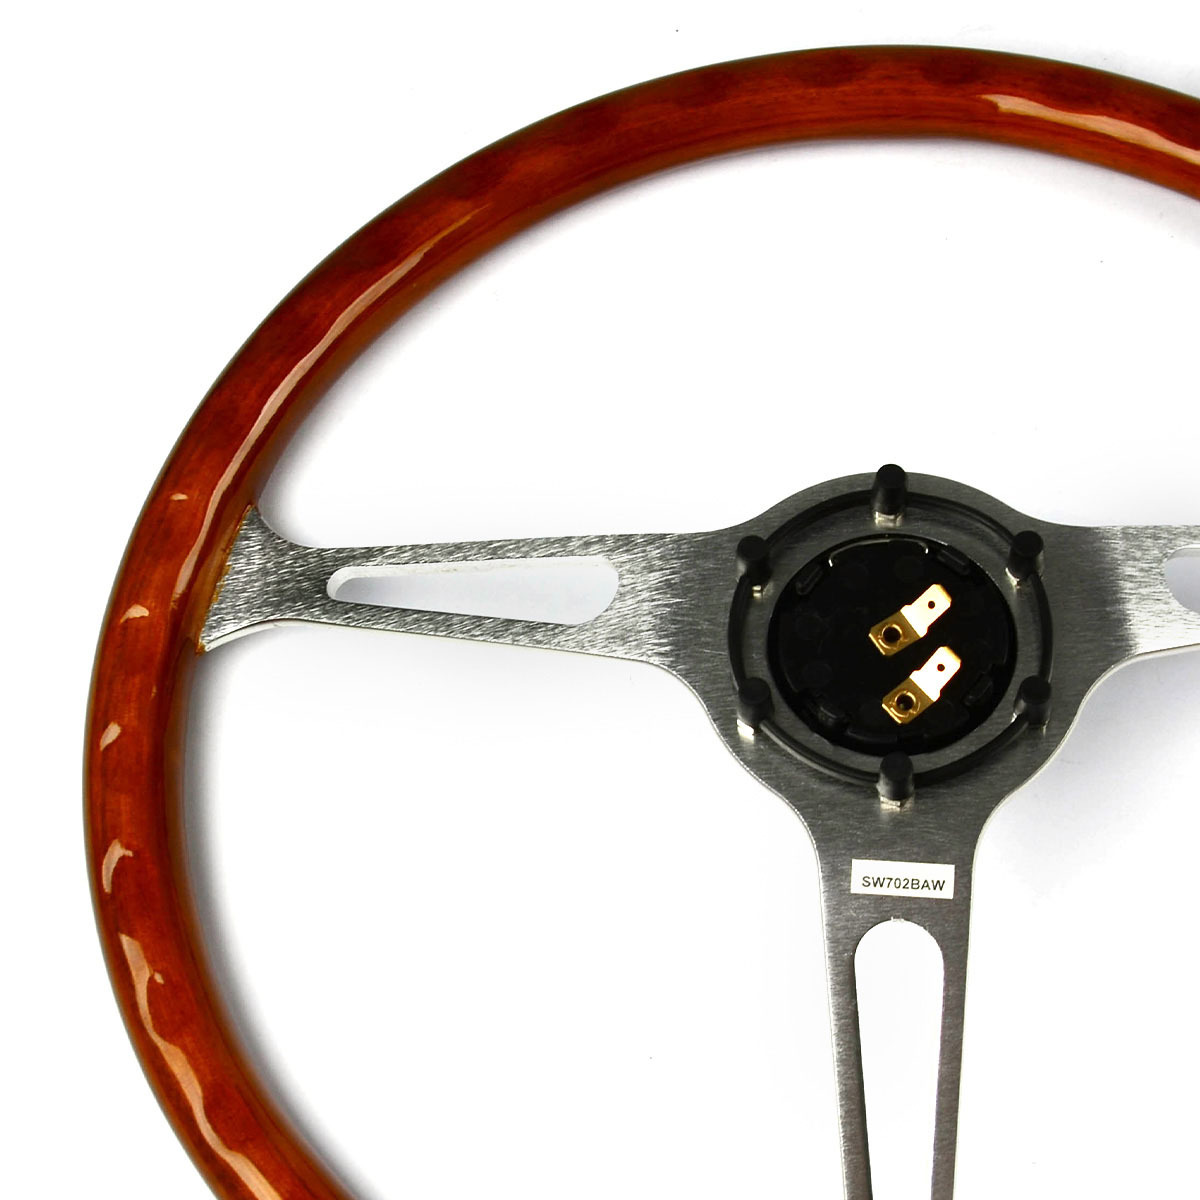 Steering Wheel Wood 15" ADR Classic Brushed Alloy Slotted